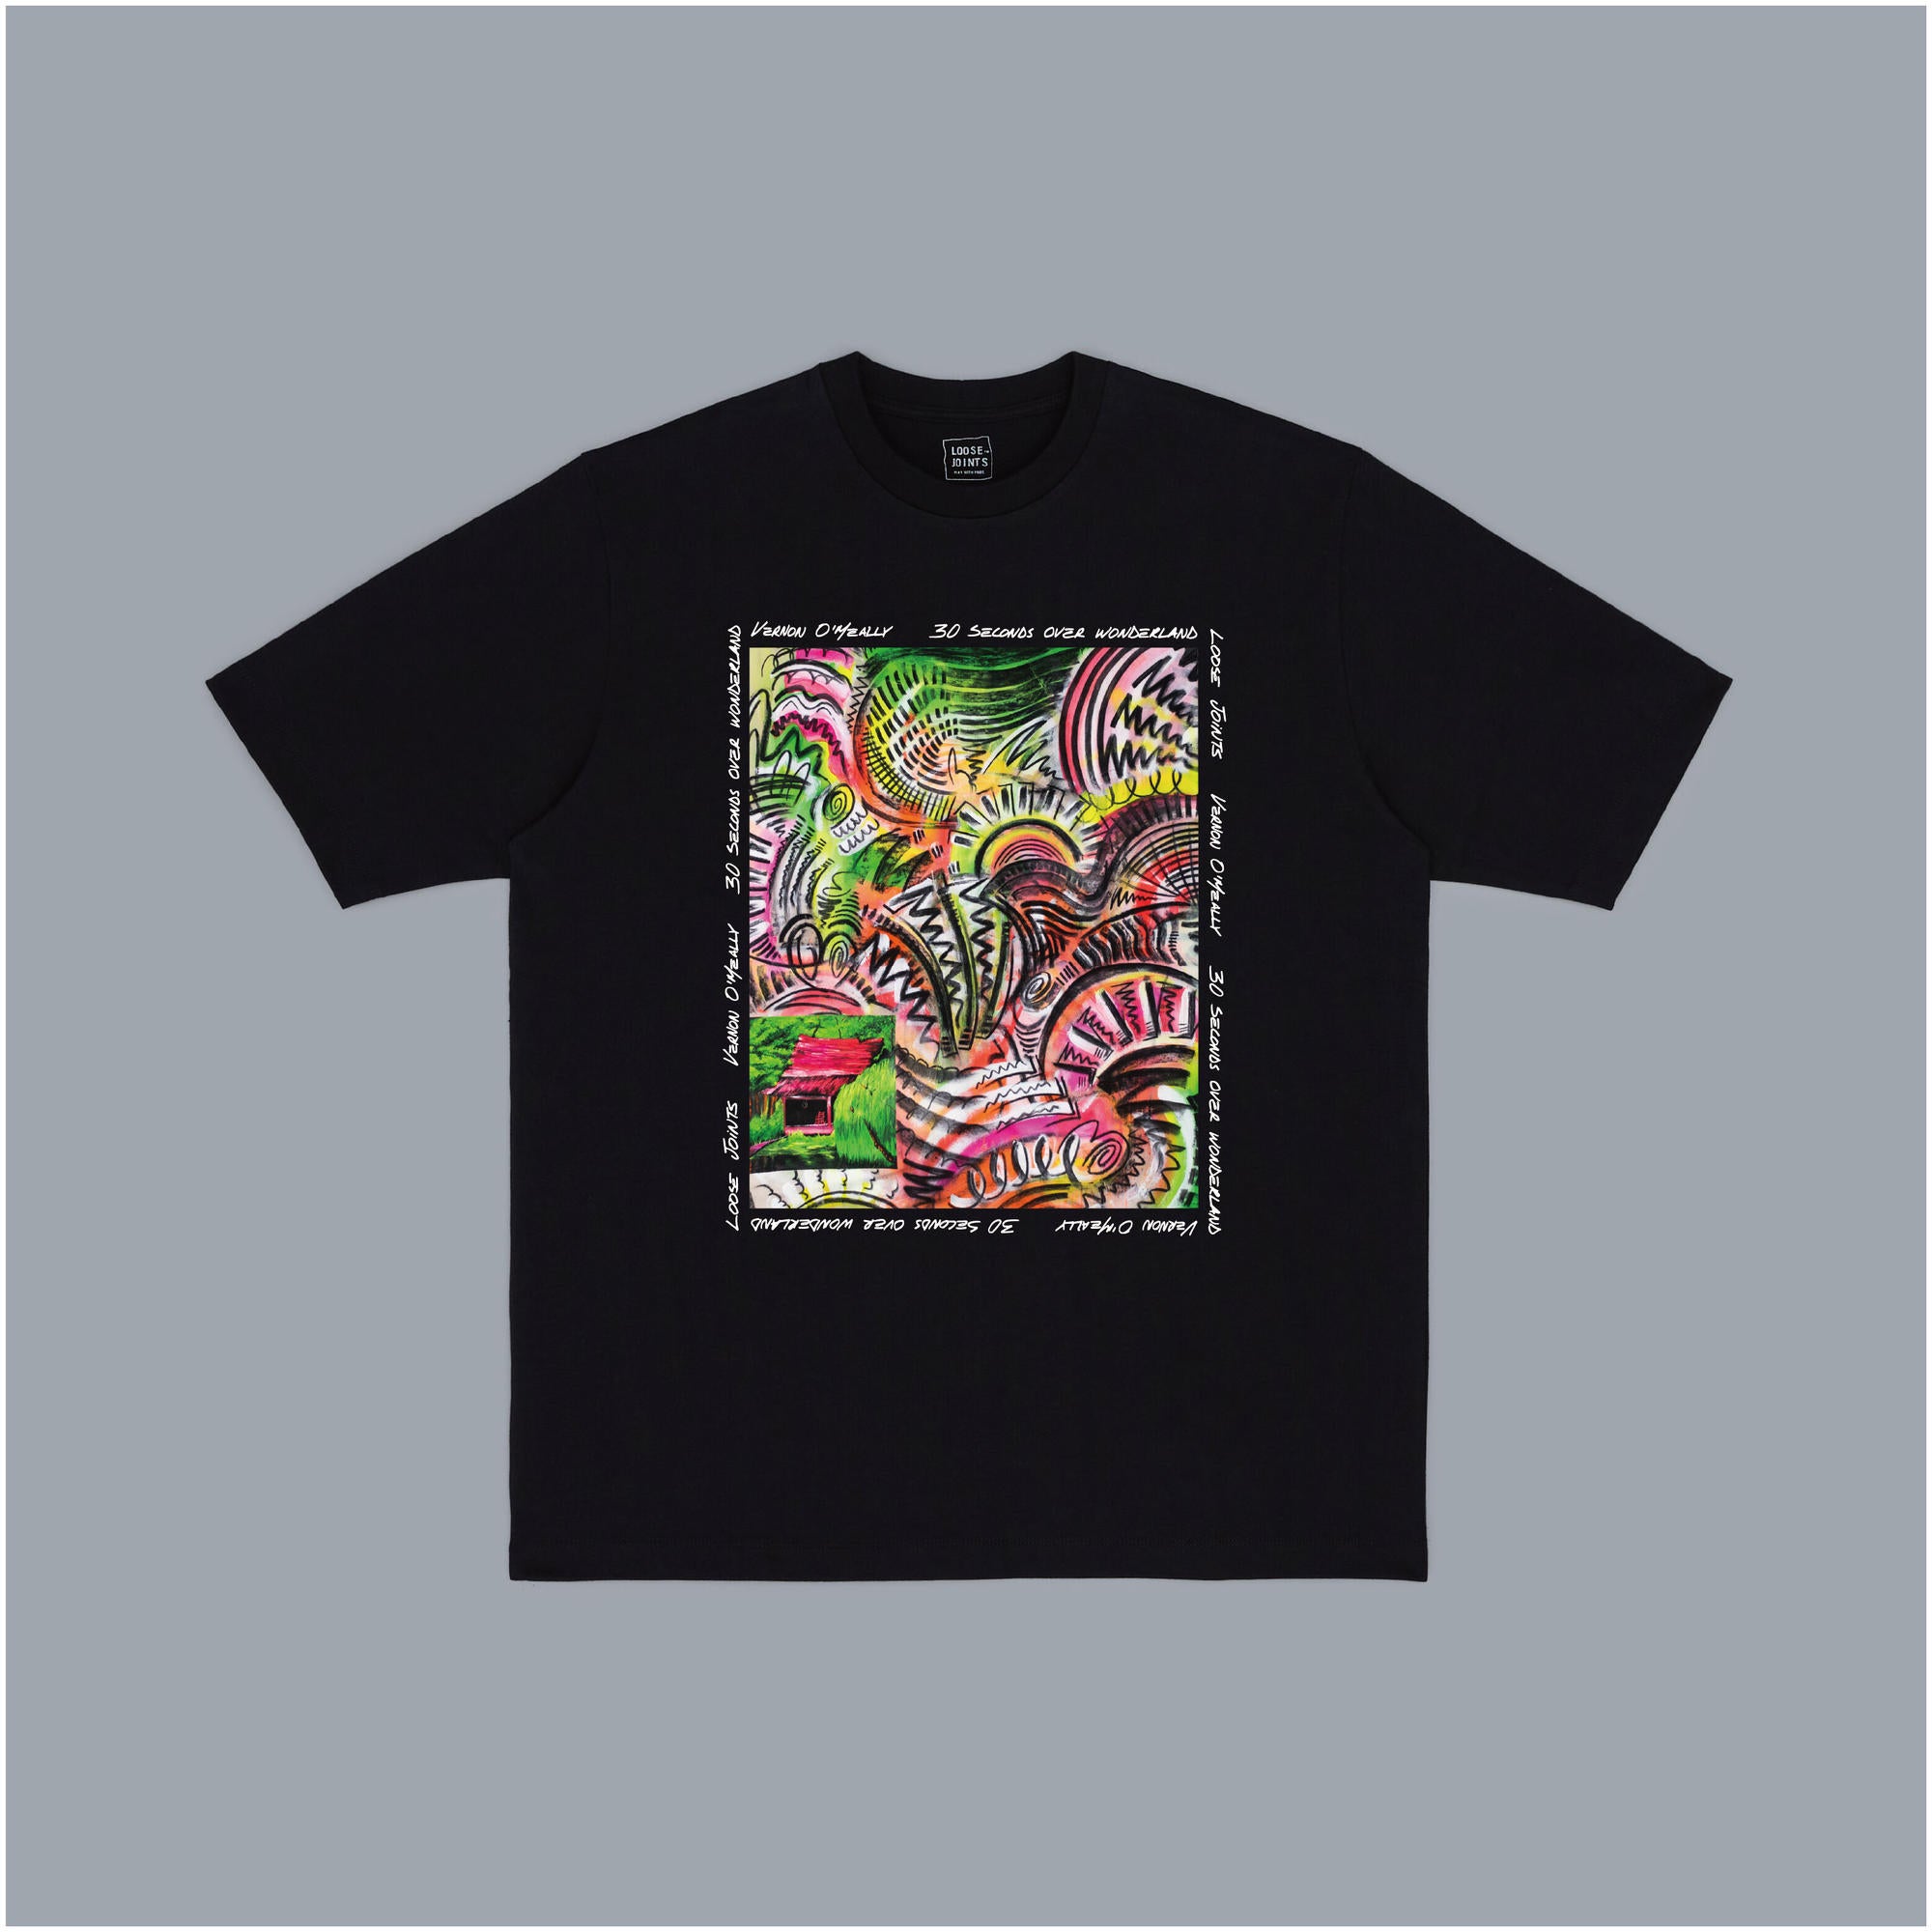 VERNON O’MEALLY - '30 SECONDS OVER WONDERLAND' S/S TEE